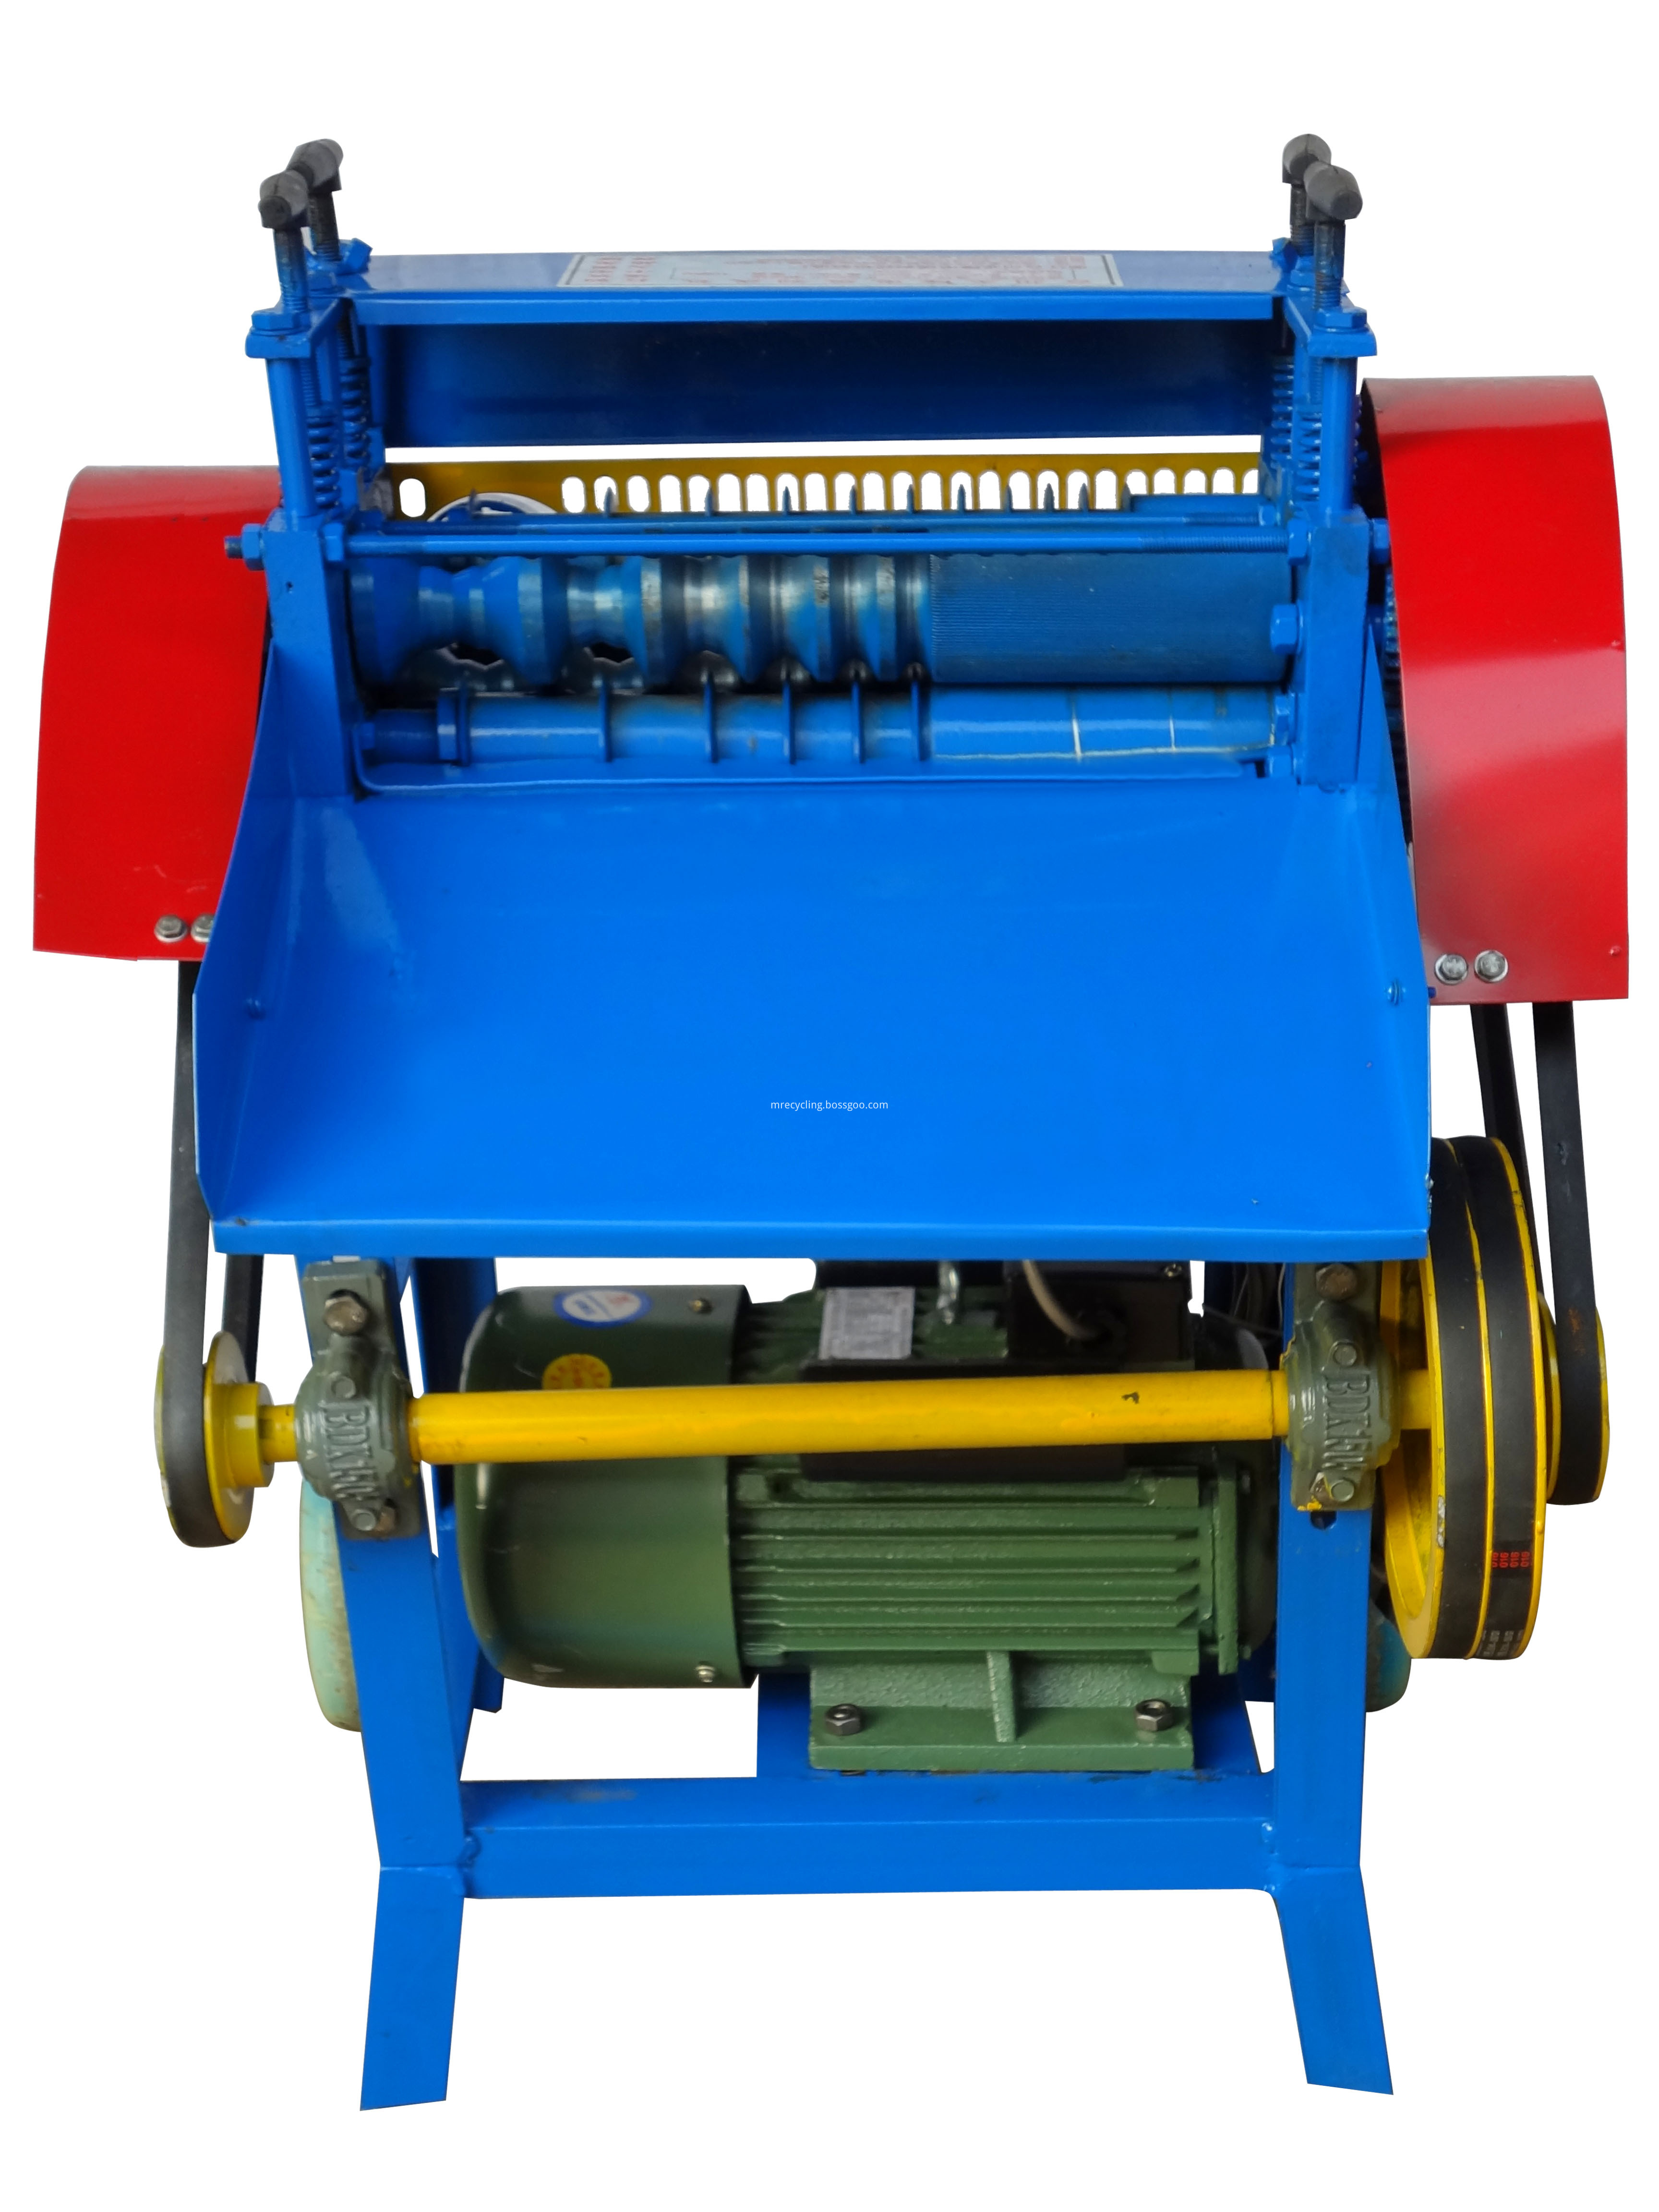 covered wire peeling machine